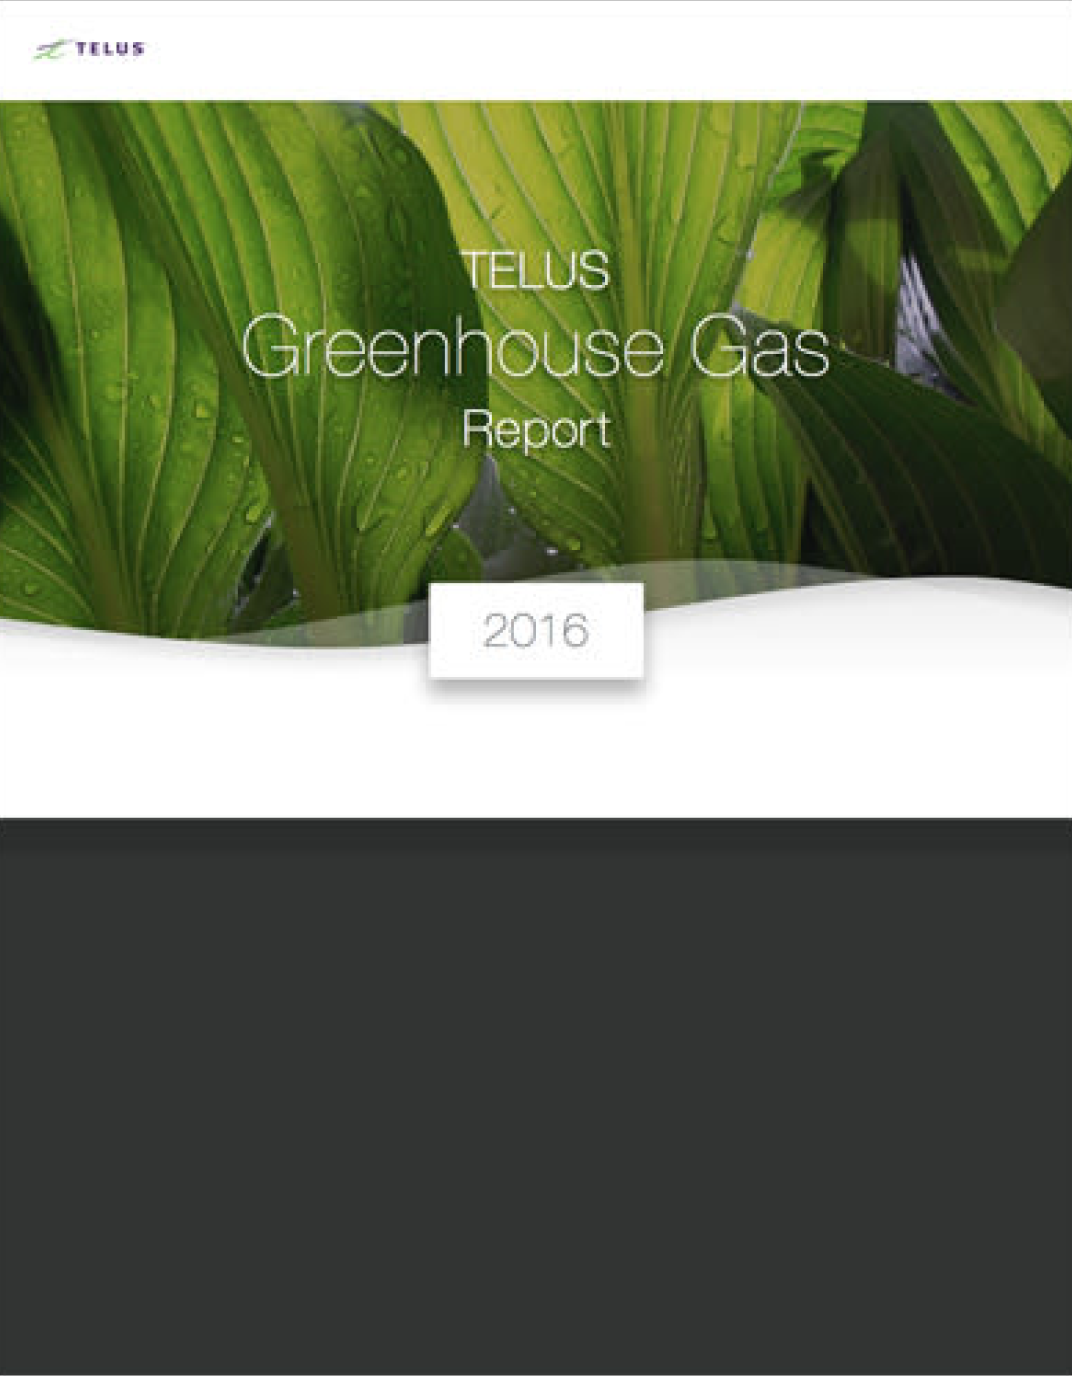 The cover of the 2016 GHG Report 